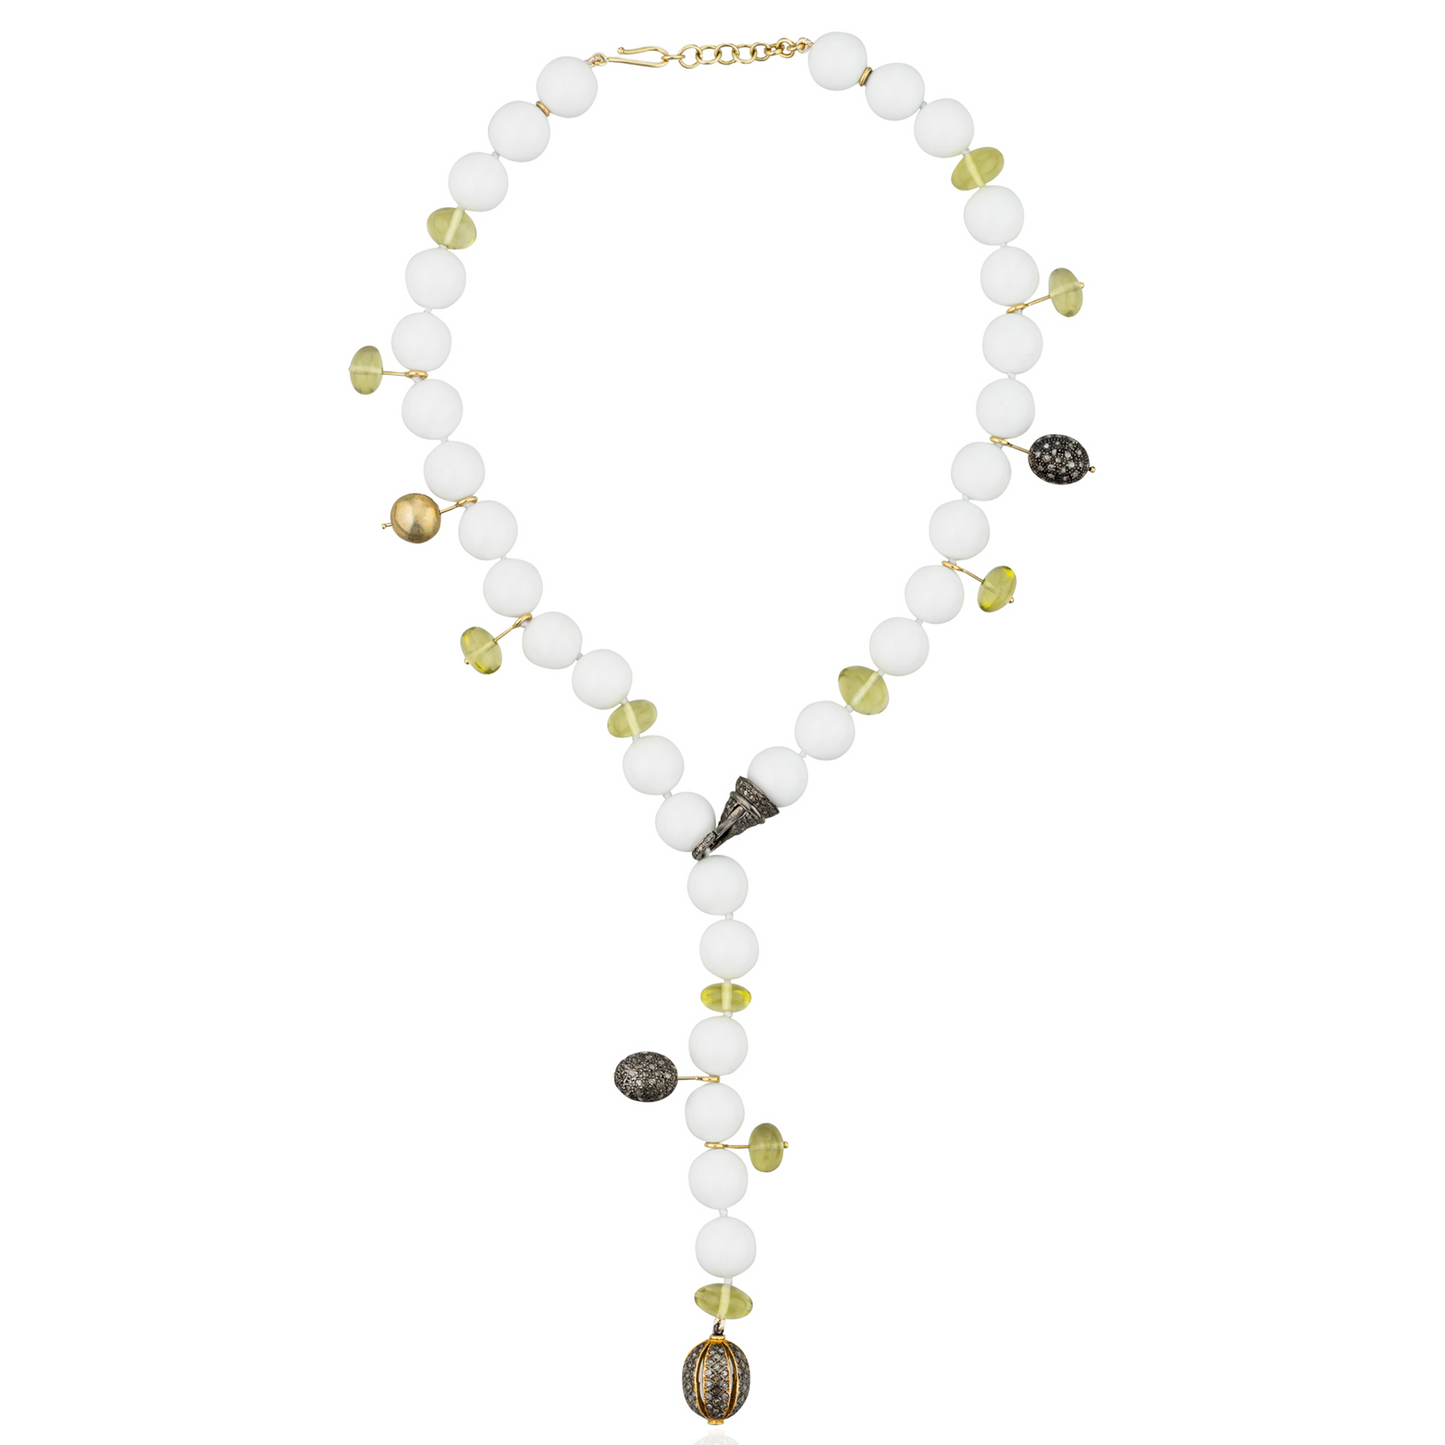 18KT Yellow Gold Necklace with White Agate Beads.